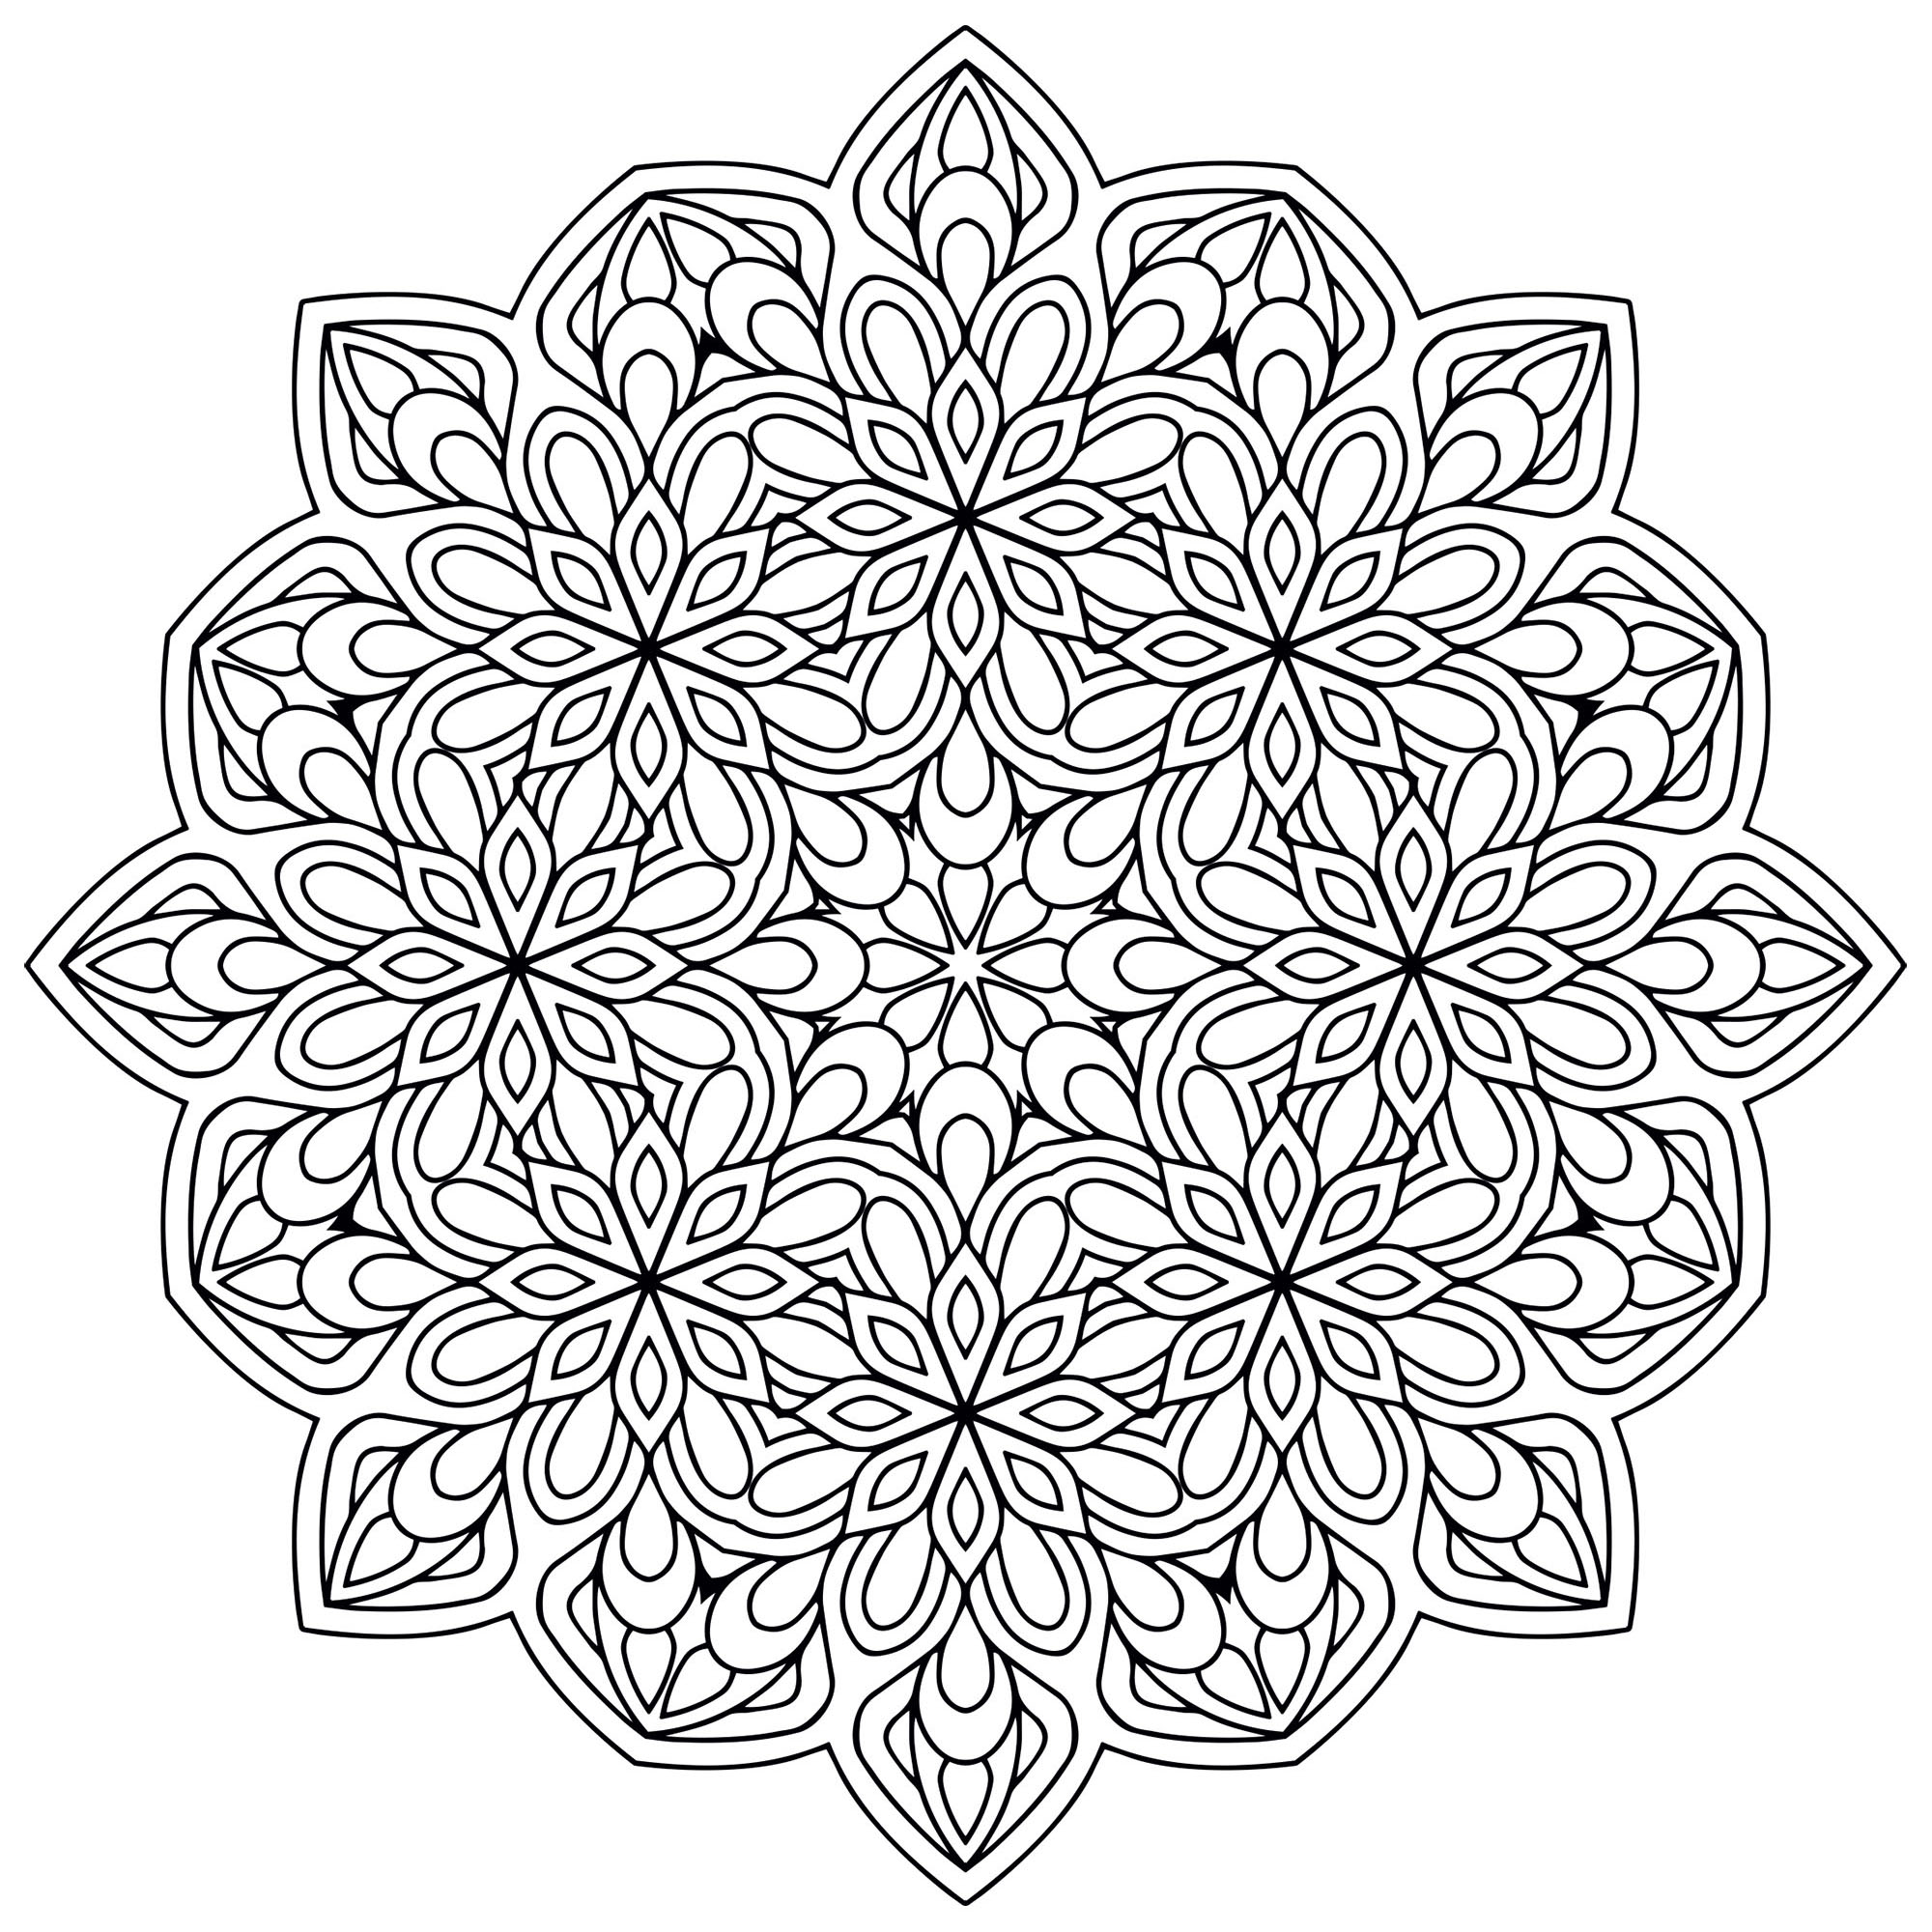 zendoodle-coloring-pages-at-getdrawings-free-download